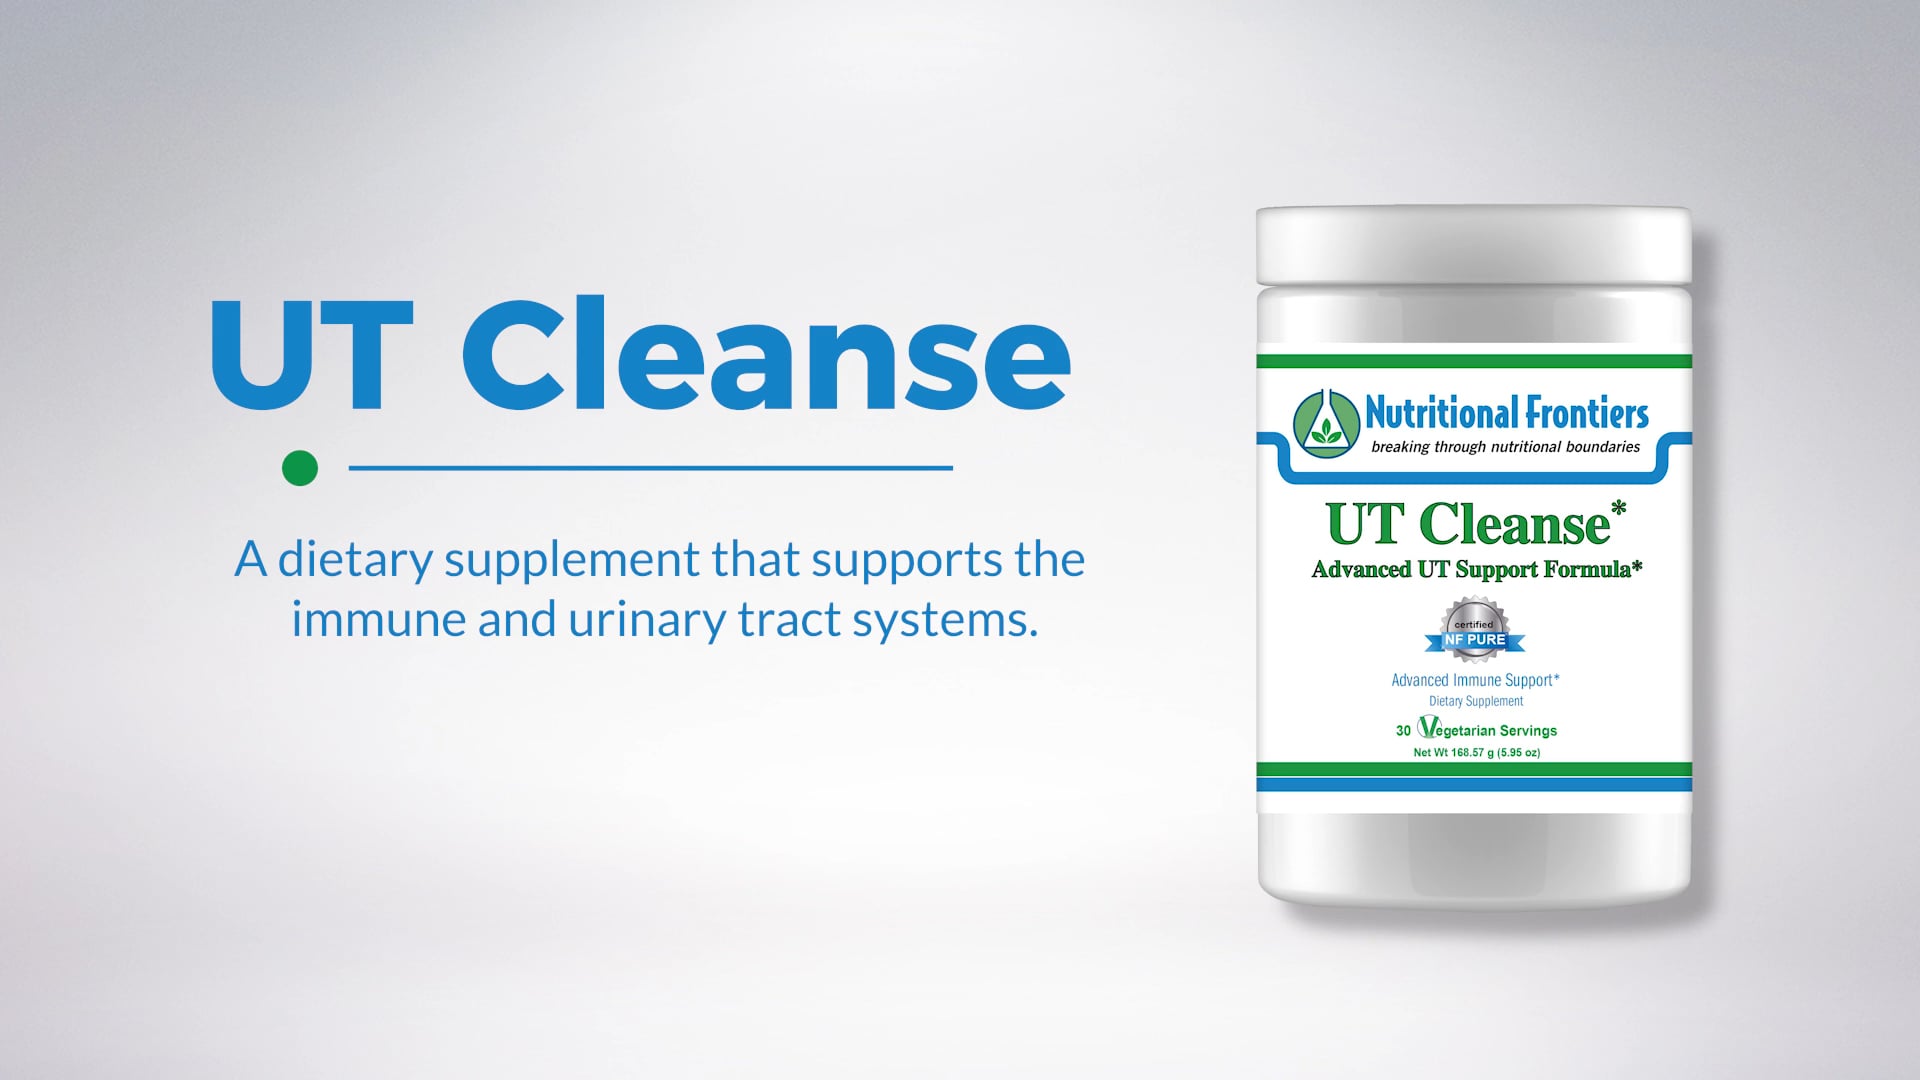 NF Product Overview - UT Cleanse